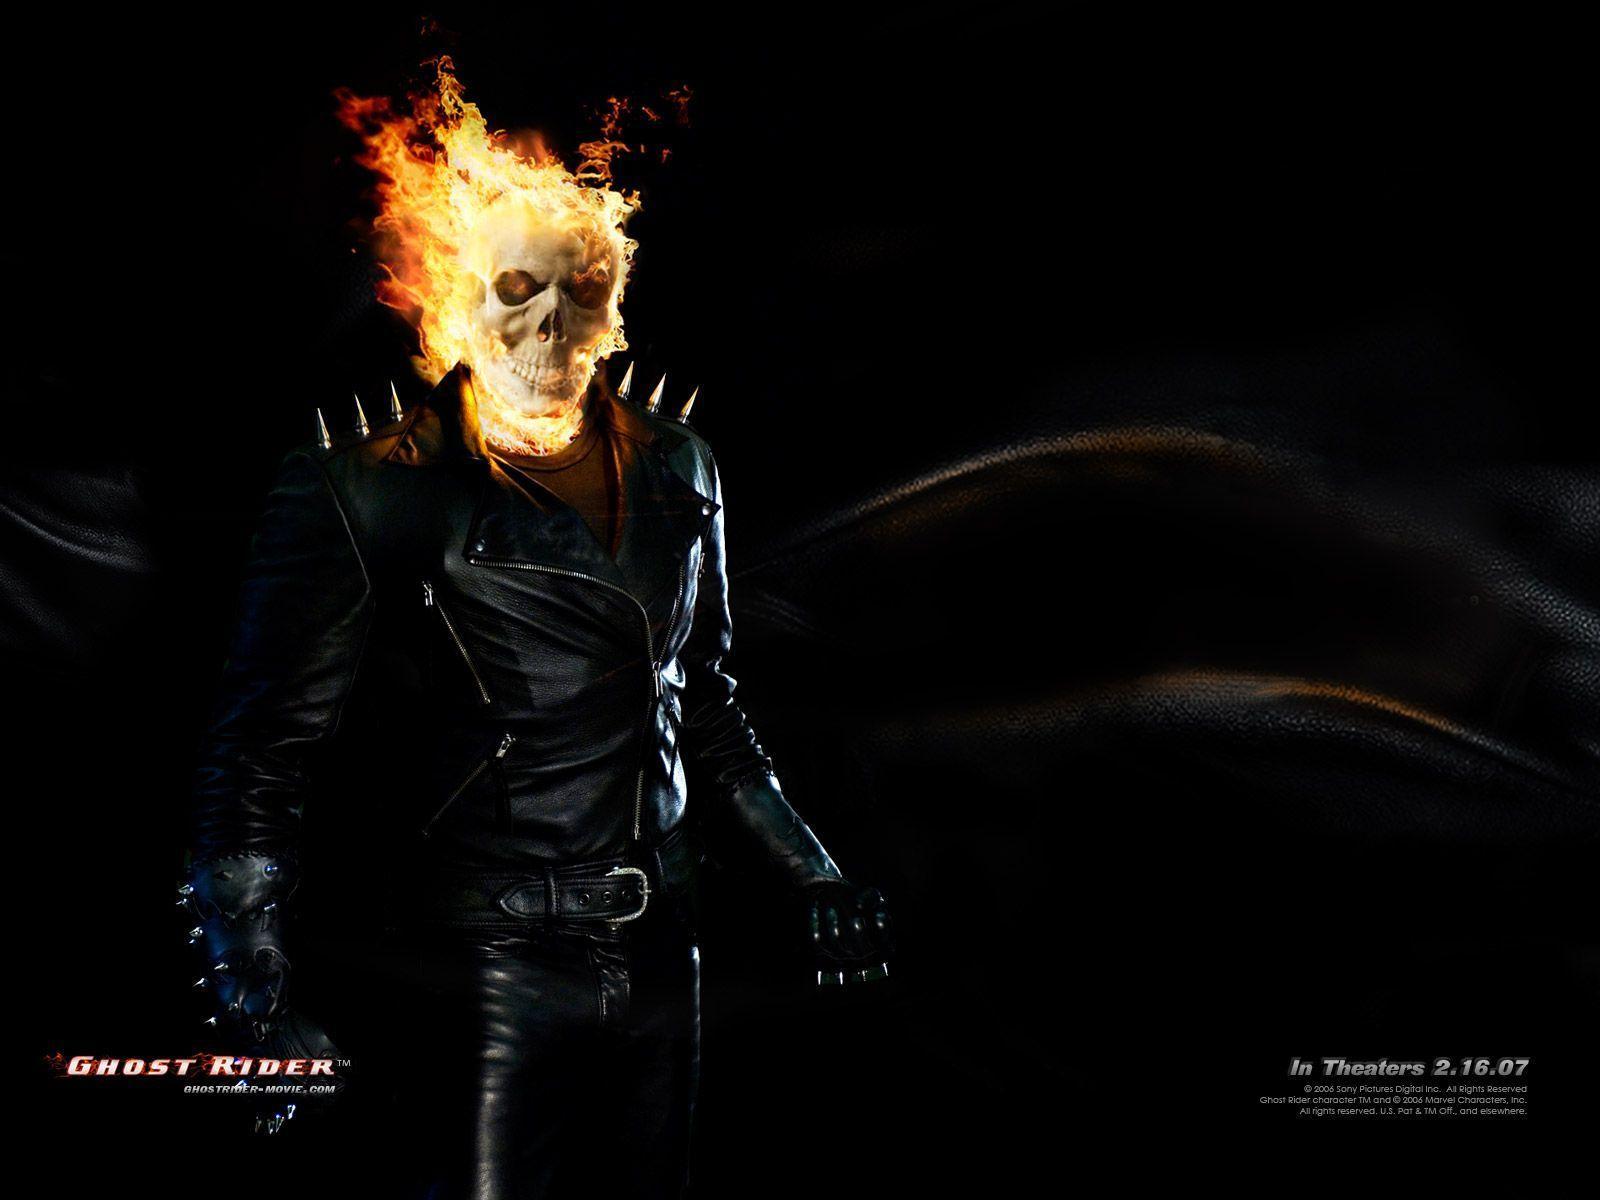 image about Weird Creatures. Ghost Rider